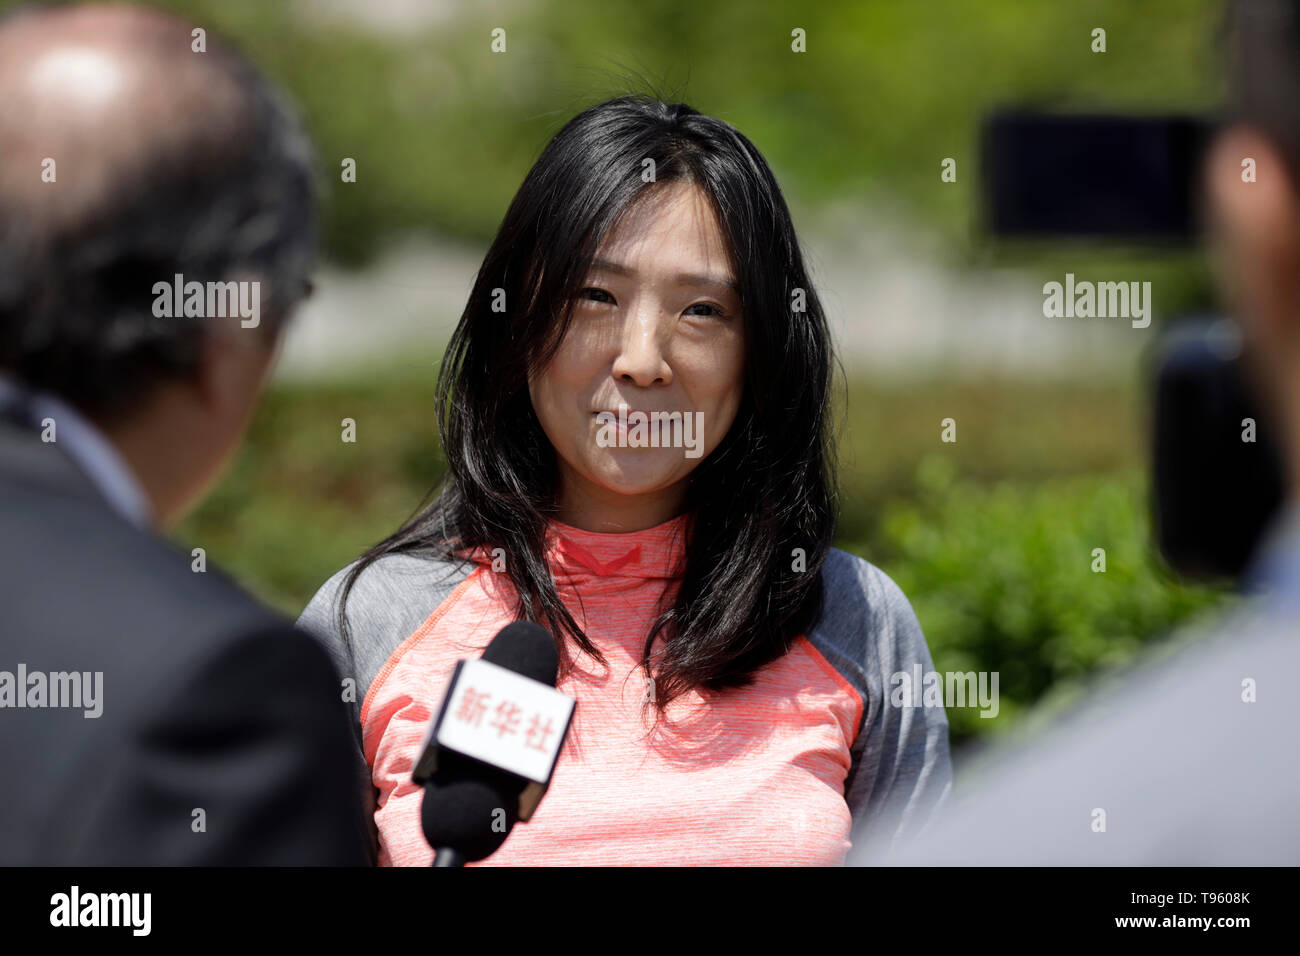 New York, Xinhua News Agency during an interview at the United Nations headquarters in New York. 16th May, 2019. Virginia Sung, a Chinese American lady who was just appointed as the CEO of USA Table Tennis (USATT), speaks to a journalist from Xinhua News Agency during an interview at the United Nations headquarters in New York, May 16, 2019. Credit: Li Muzi/Xinhua/Alamy Live News Stock Photo